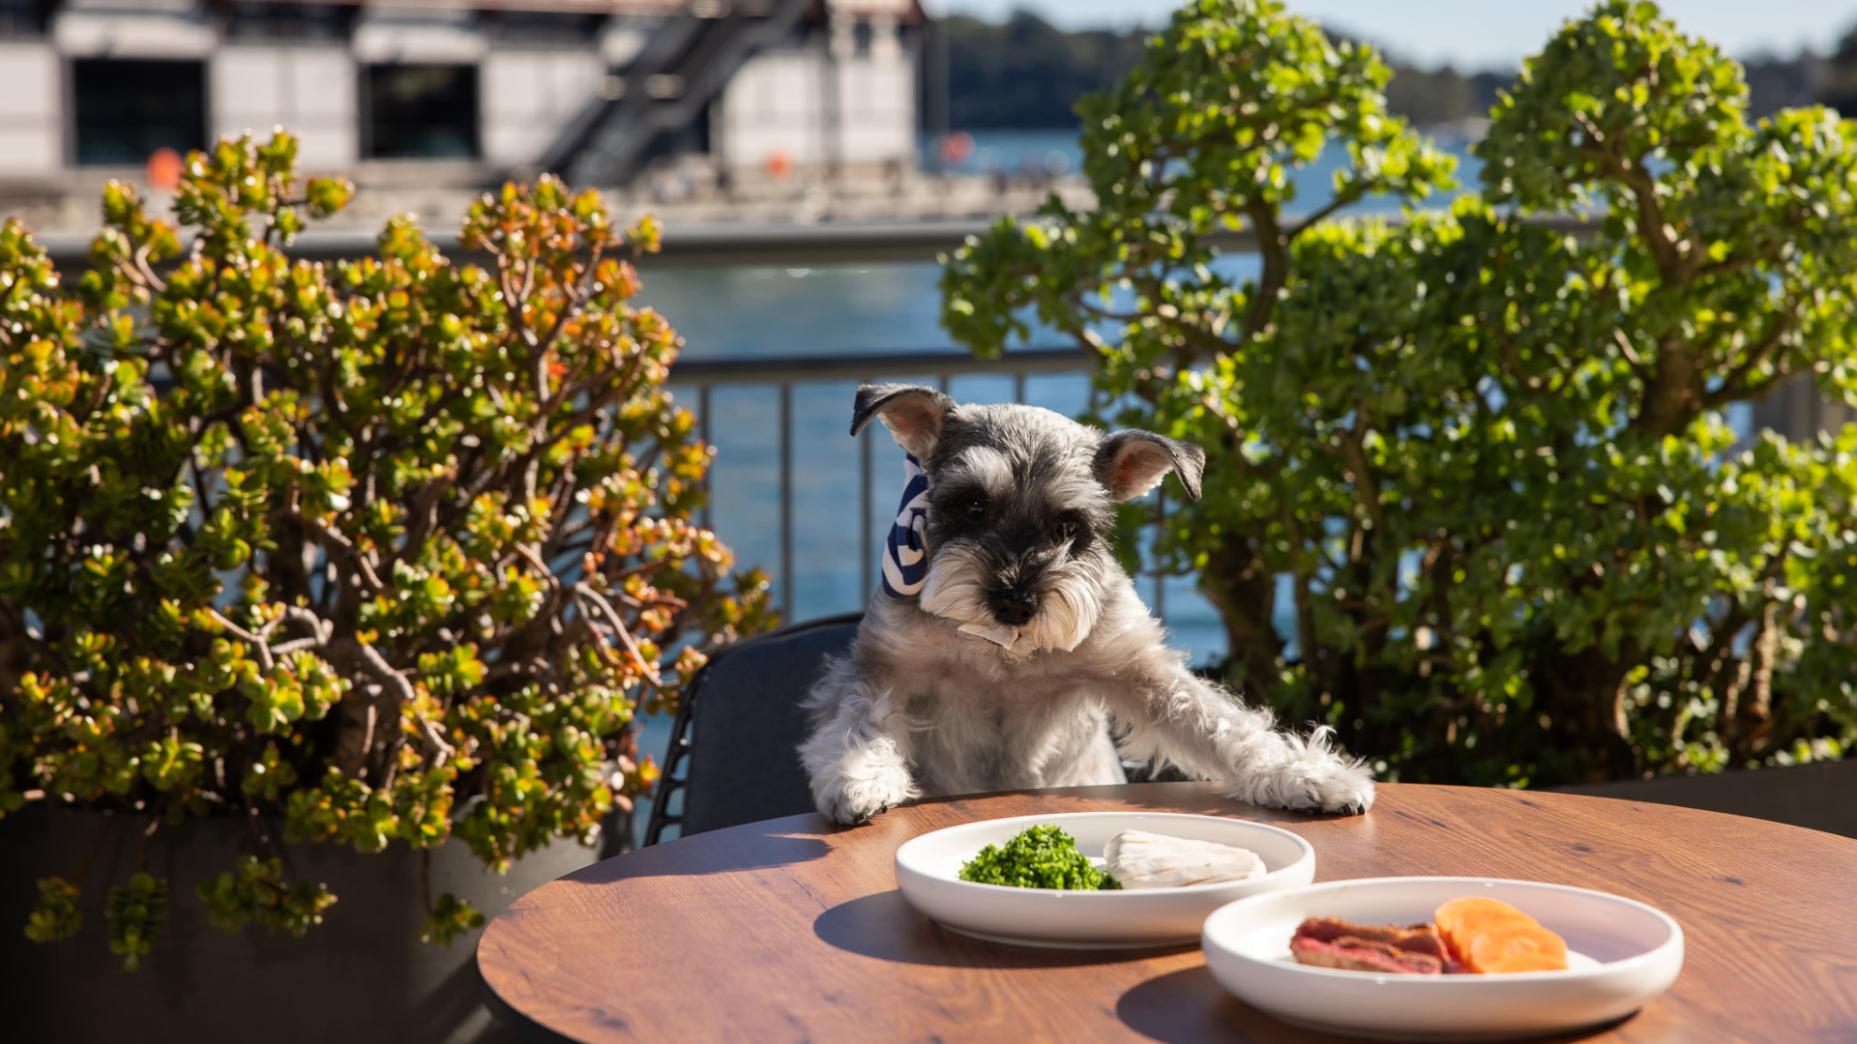 Pups on the Pier at Pier One Sydney | Credit: Pier One Sydney